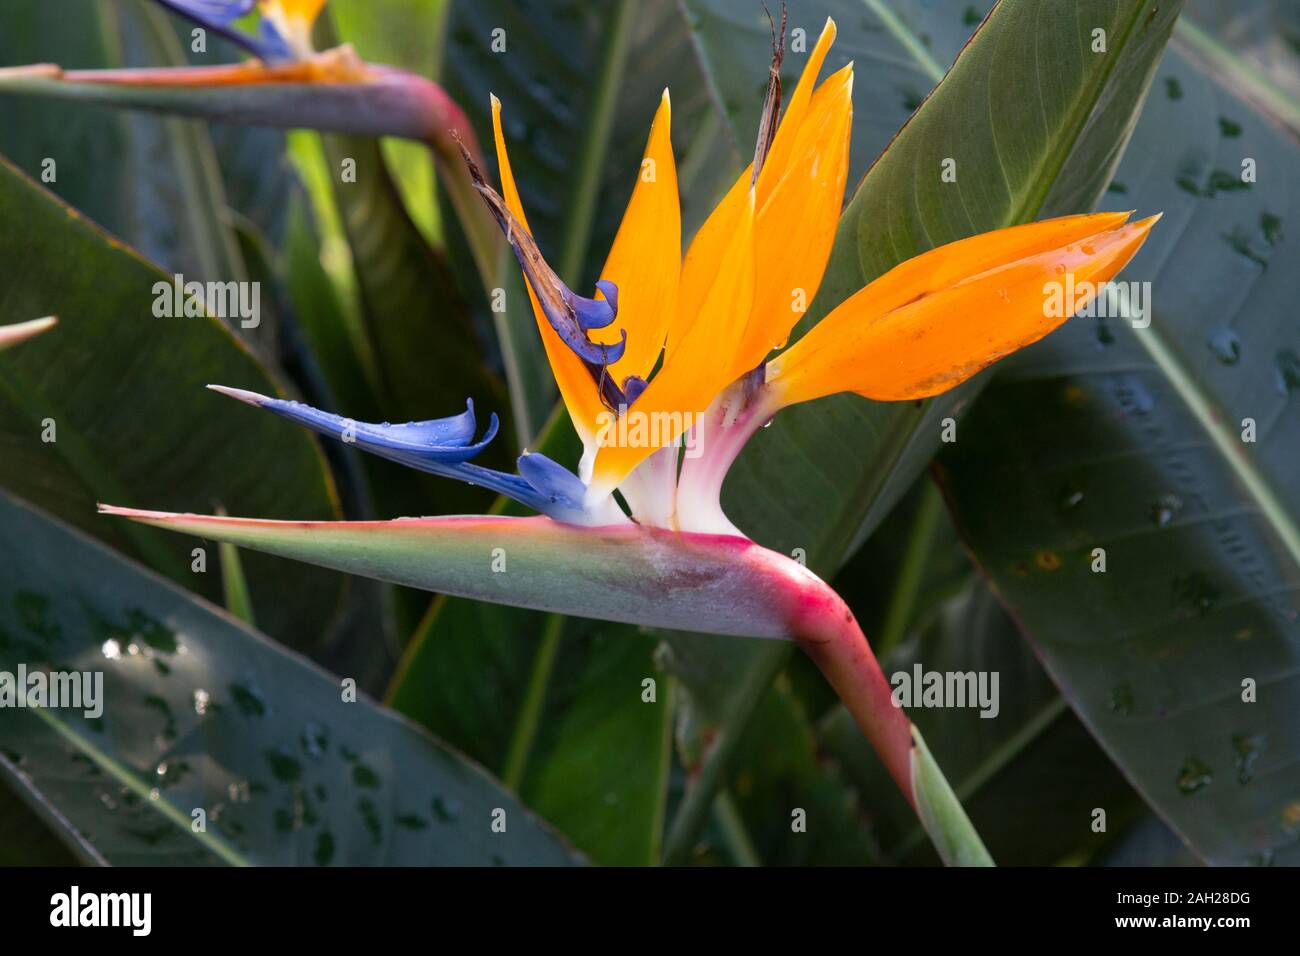 The Bird Of Paradise Flower, or Strelitzia Reginae, in a Botanical garden on the island of Sao Miguel in the Azores. Stock Photo